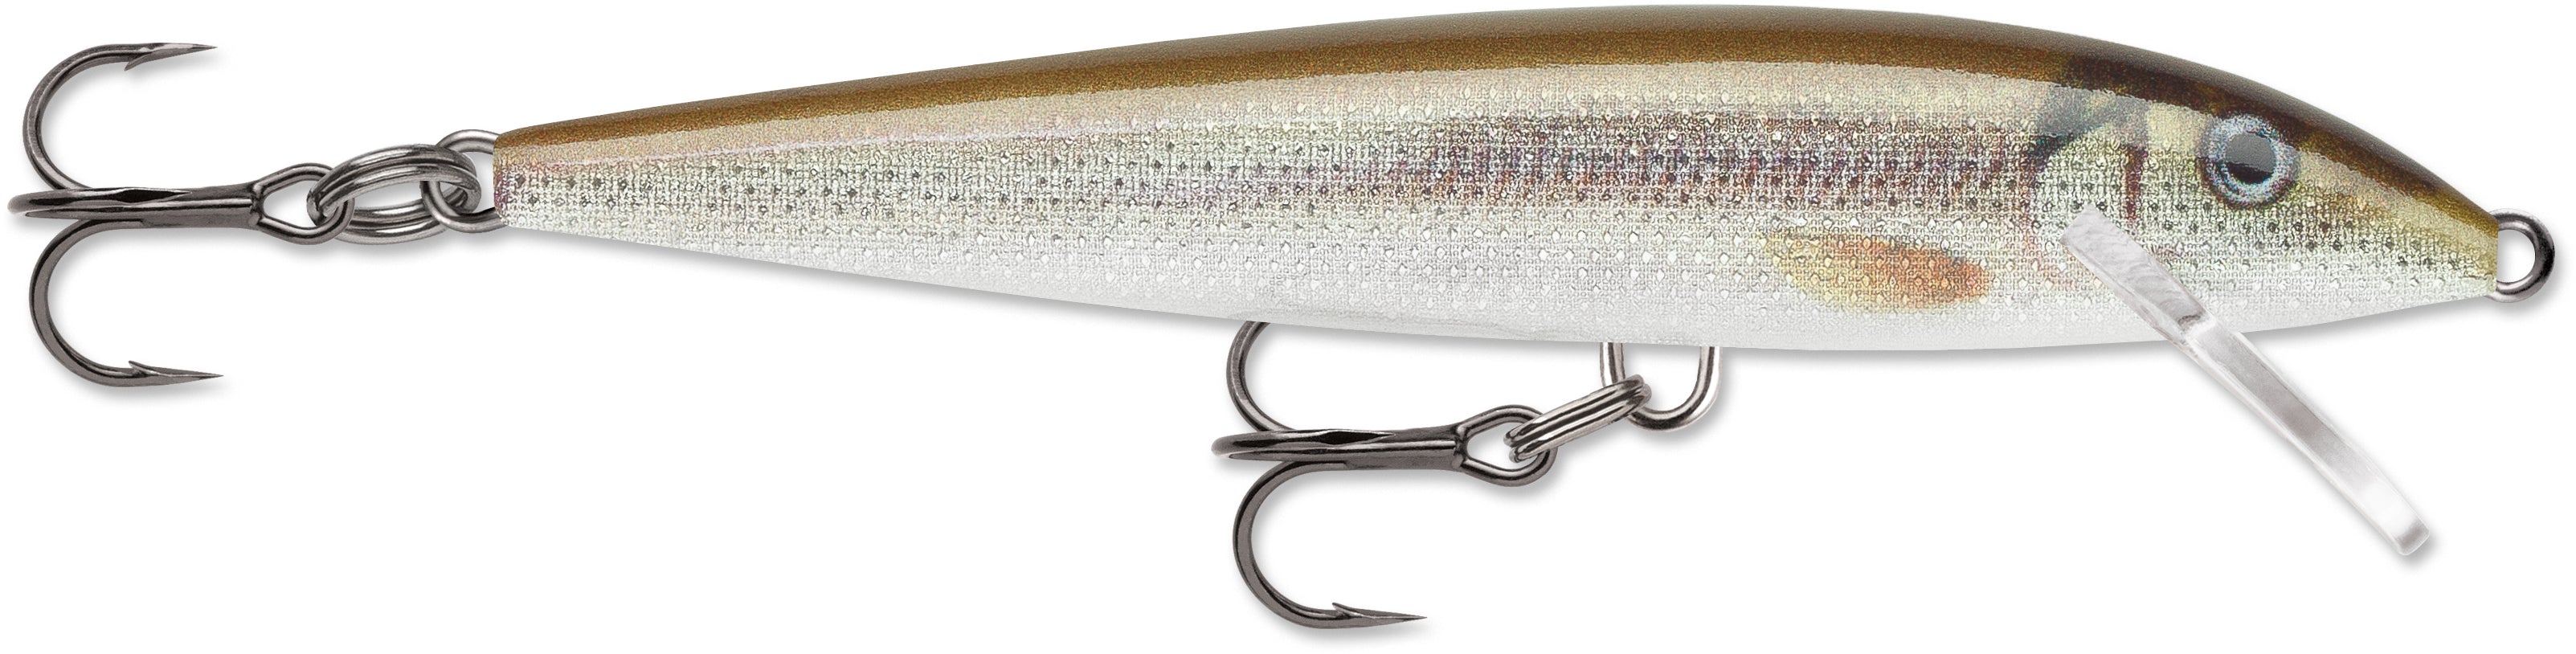 RAPALA 3 1/2 Original Floating F09 in BROOK TROUT for Bass